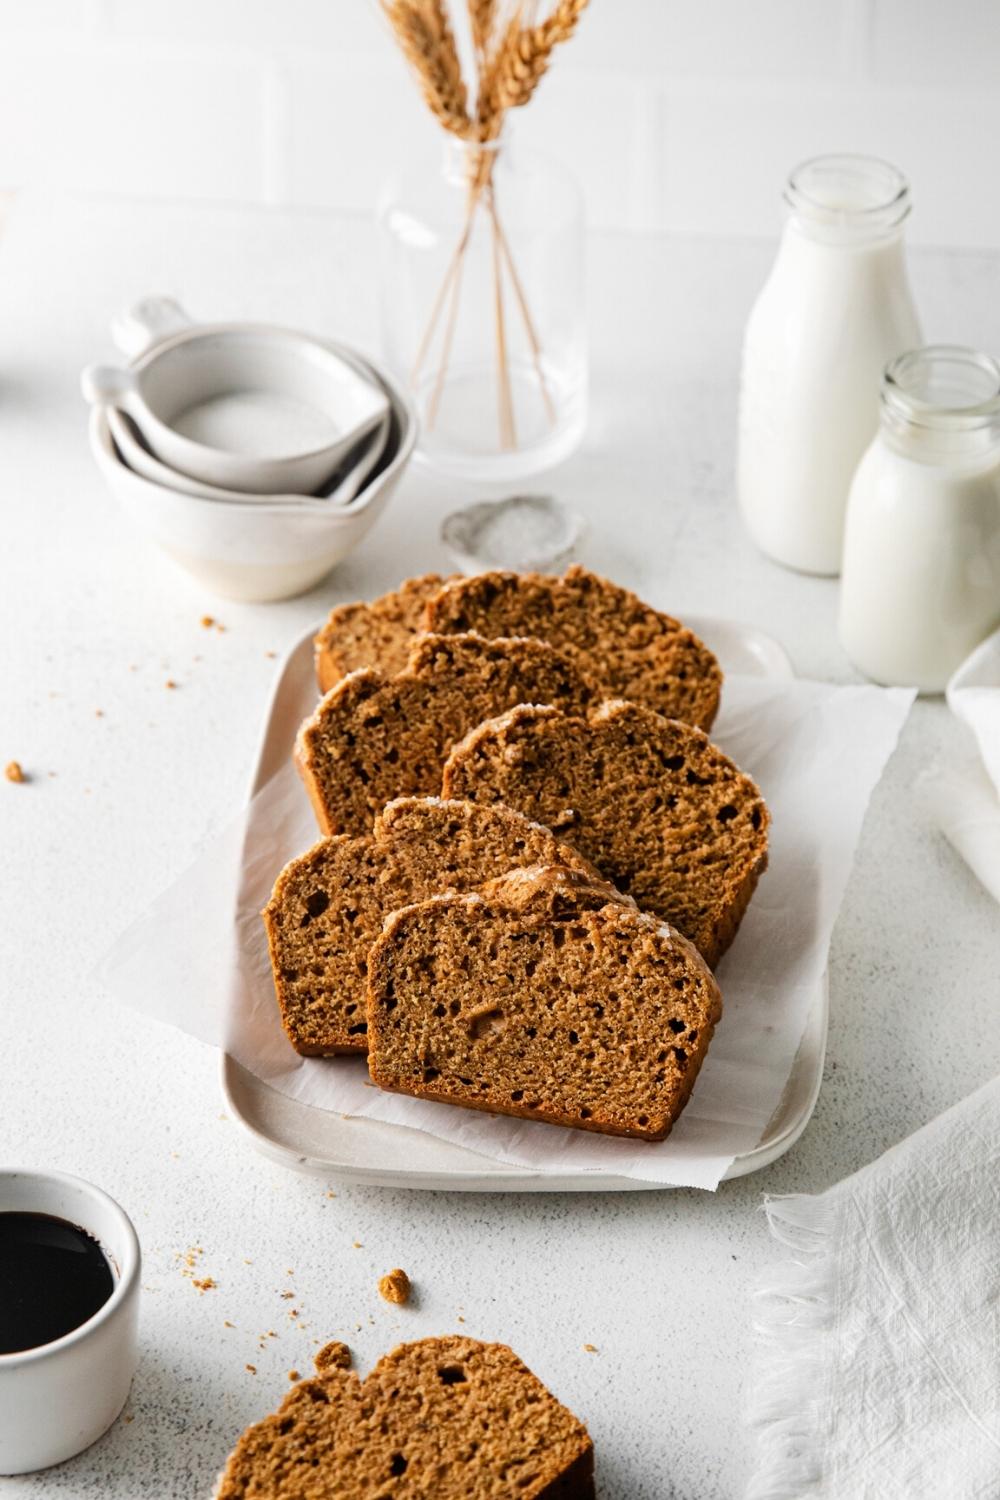 Sliced gingerbread loaf on a white platter next to glass bottles of milk and coffee.